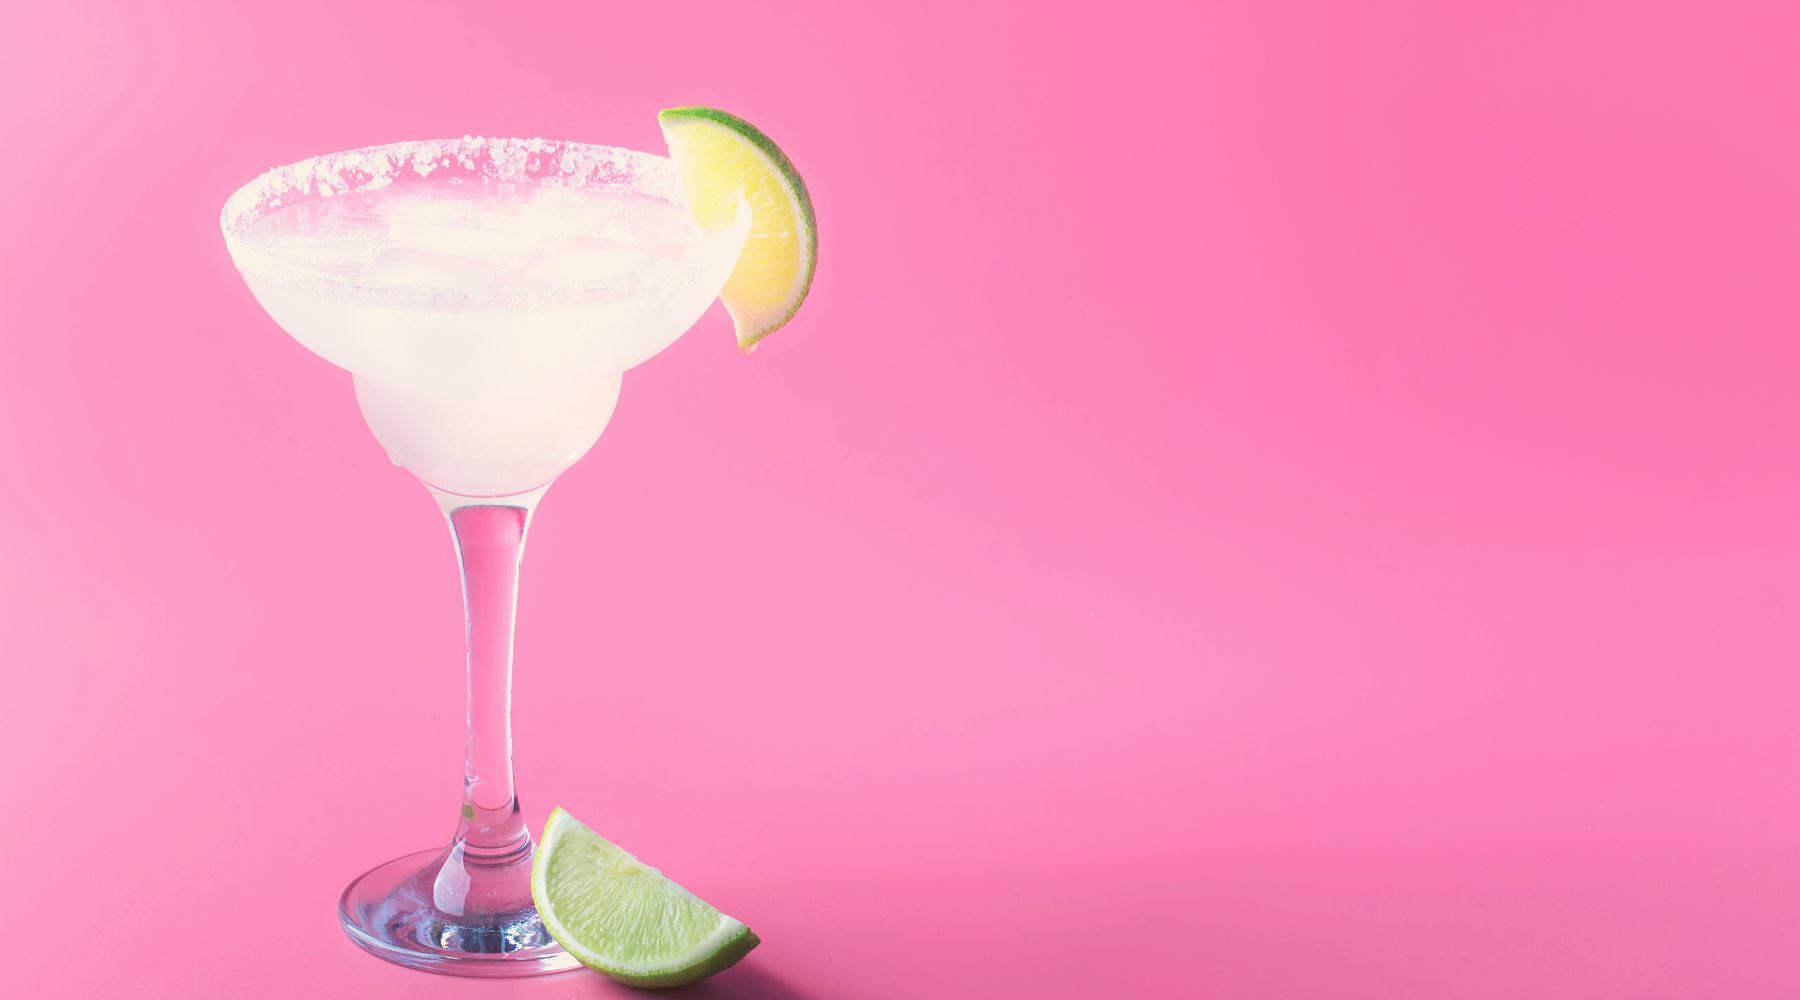 How-to make the ultimate margarita